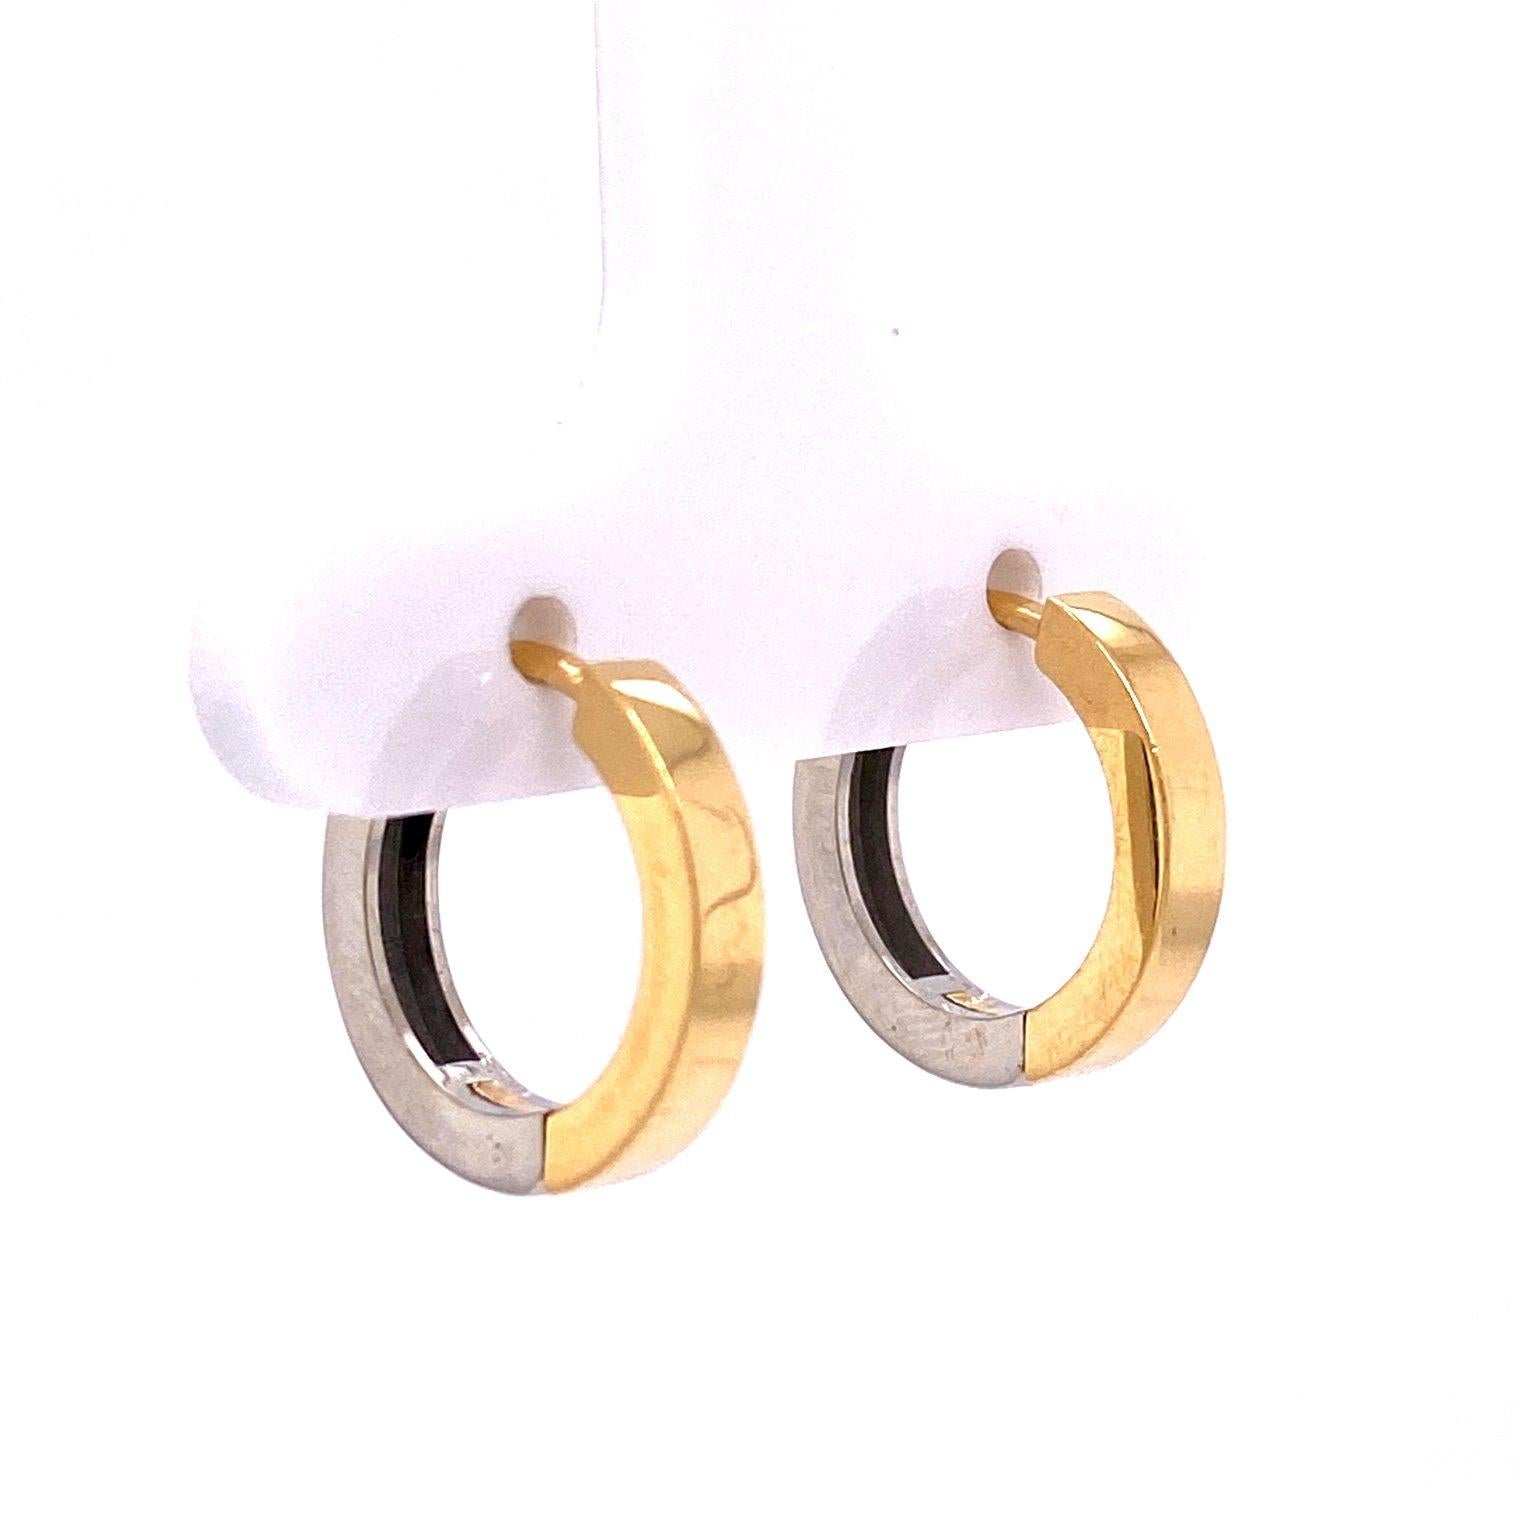 Contemporary 18k White and Yellow Gold Hoops with Sterling Silver Meteorite Jackets For Sale